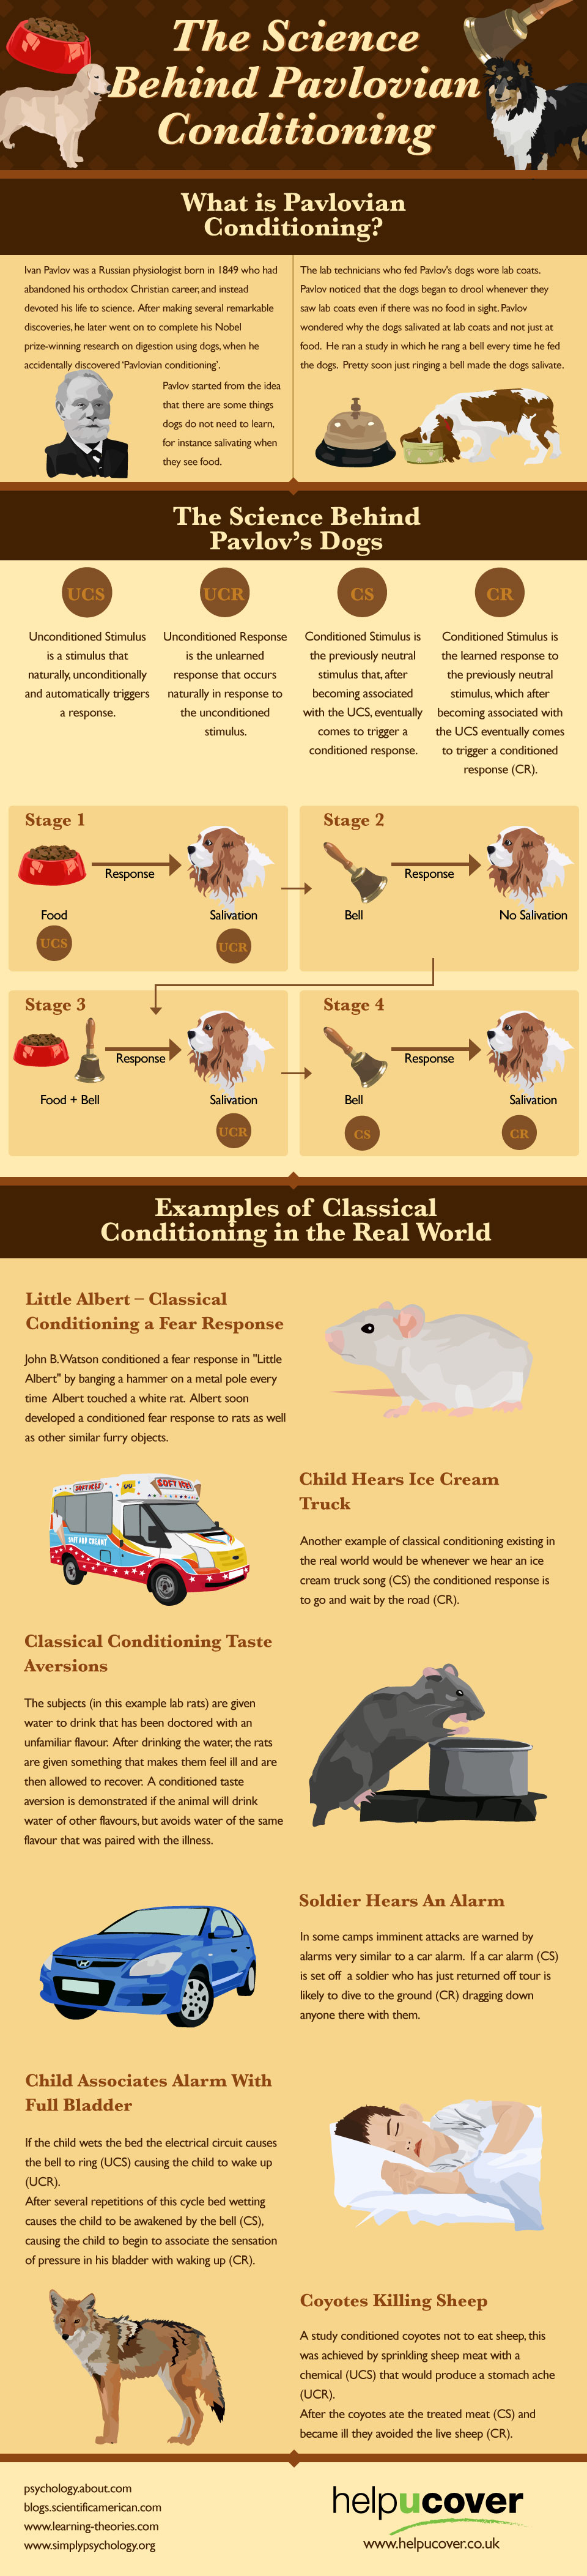 The Science Behind Pavlovian Conditioning